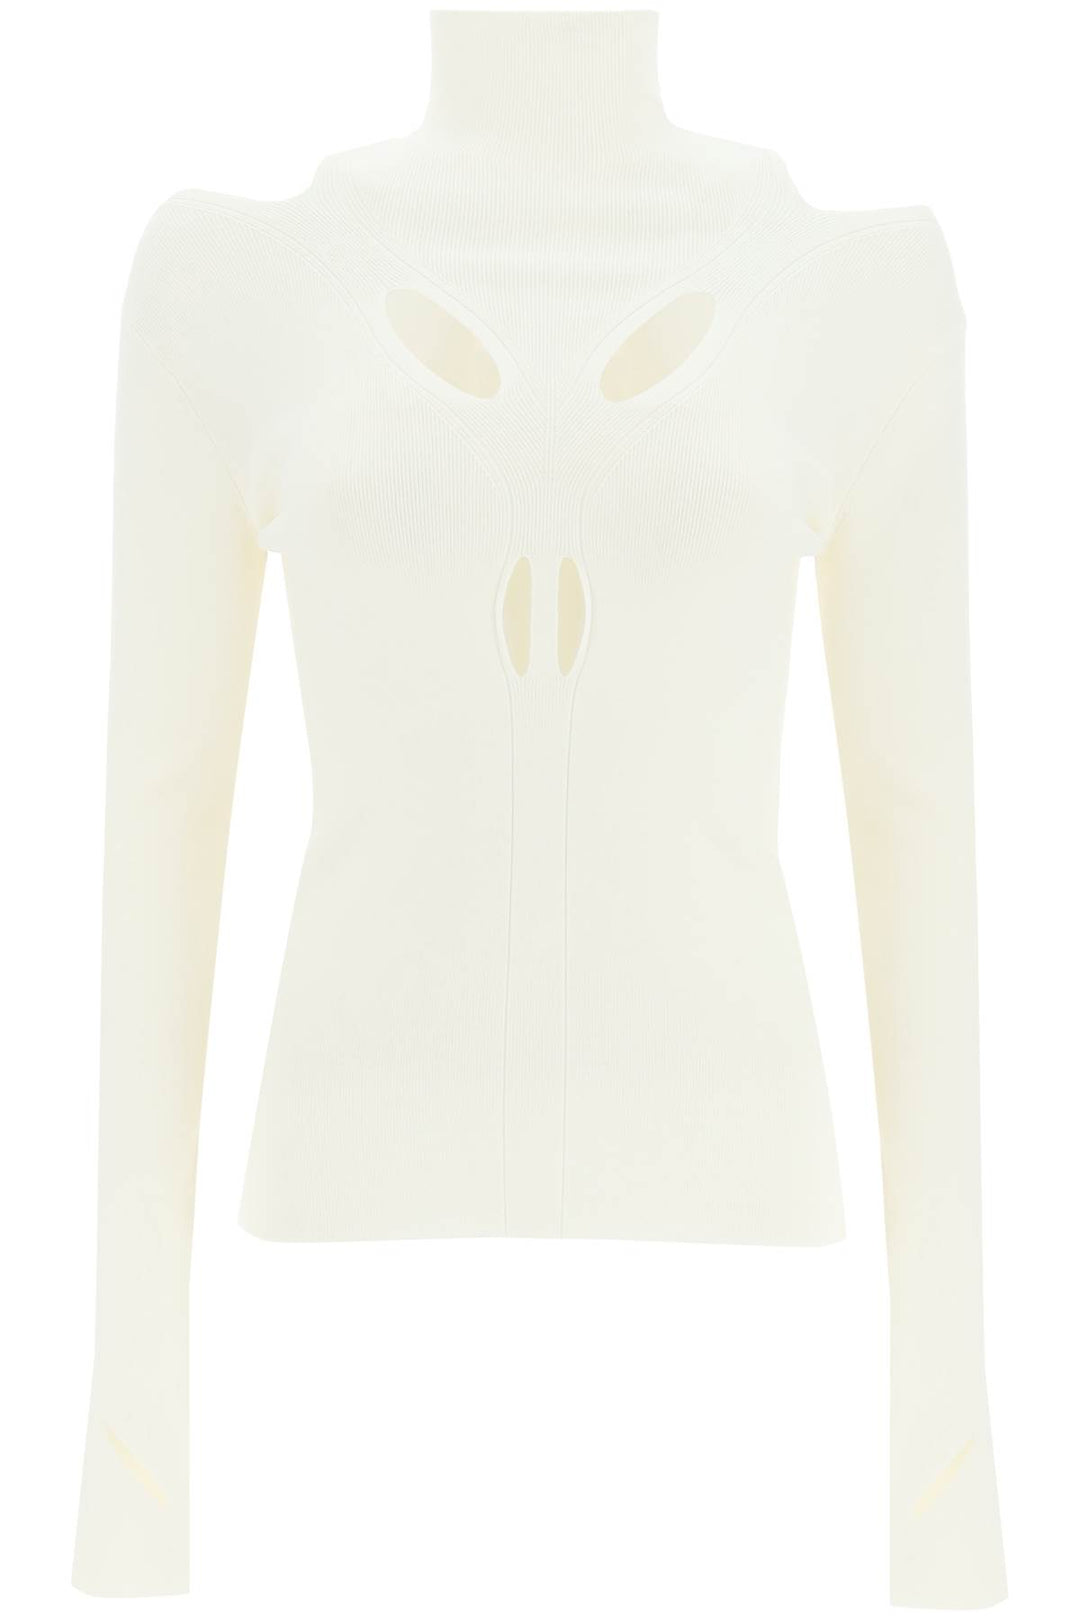 Dion lee cut-out skivvy-0